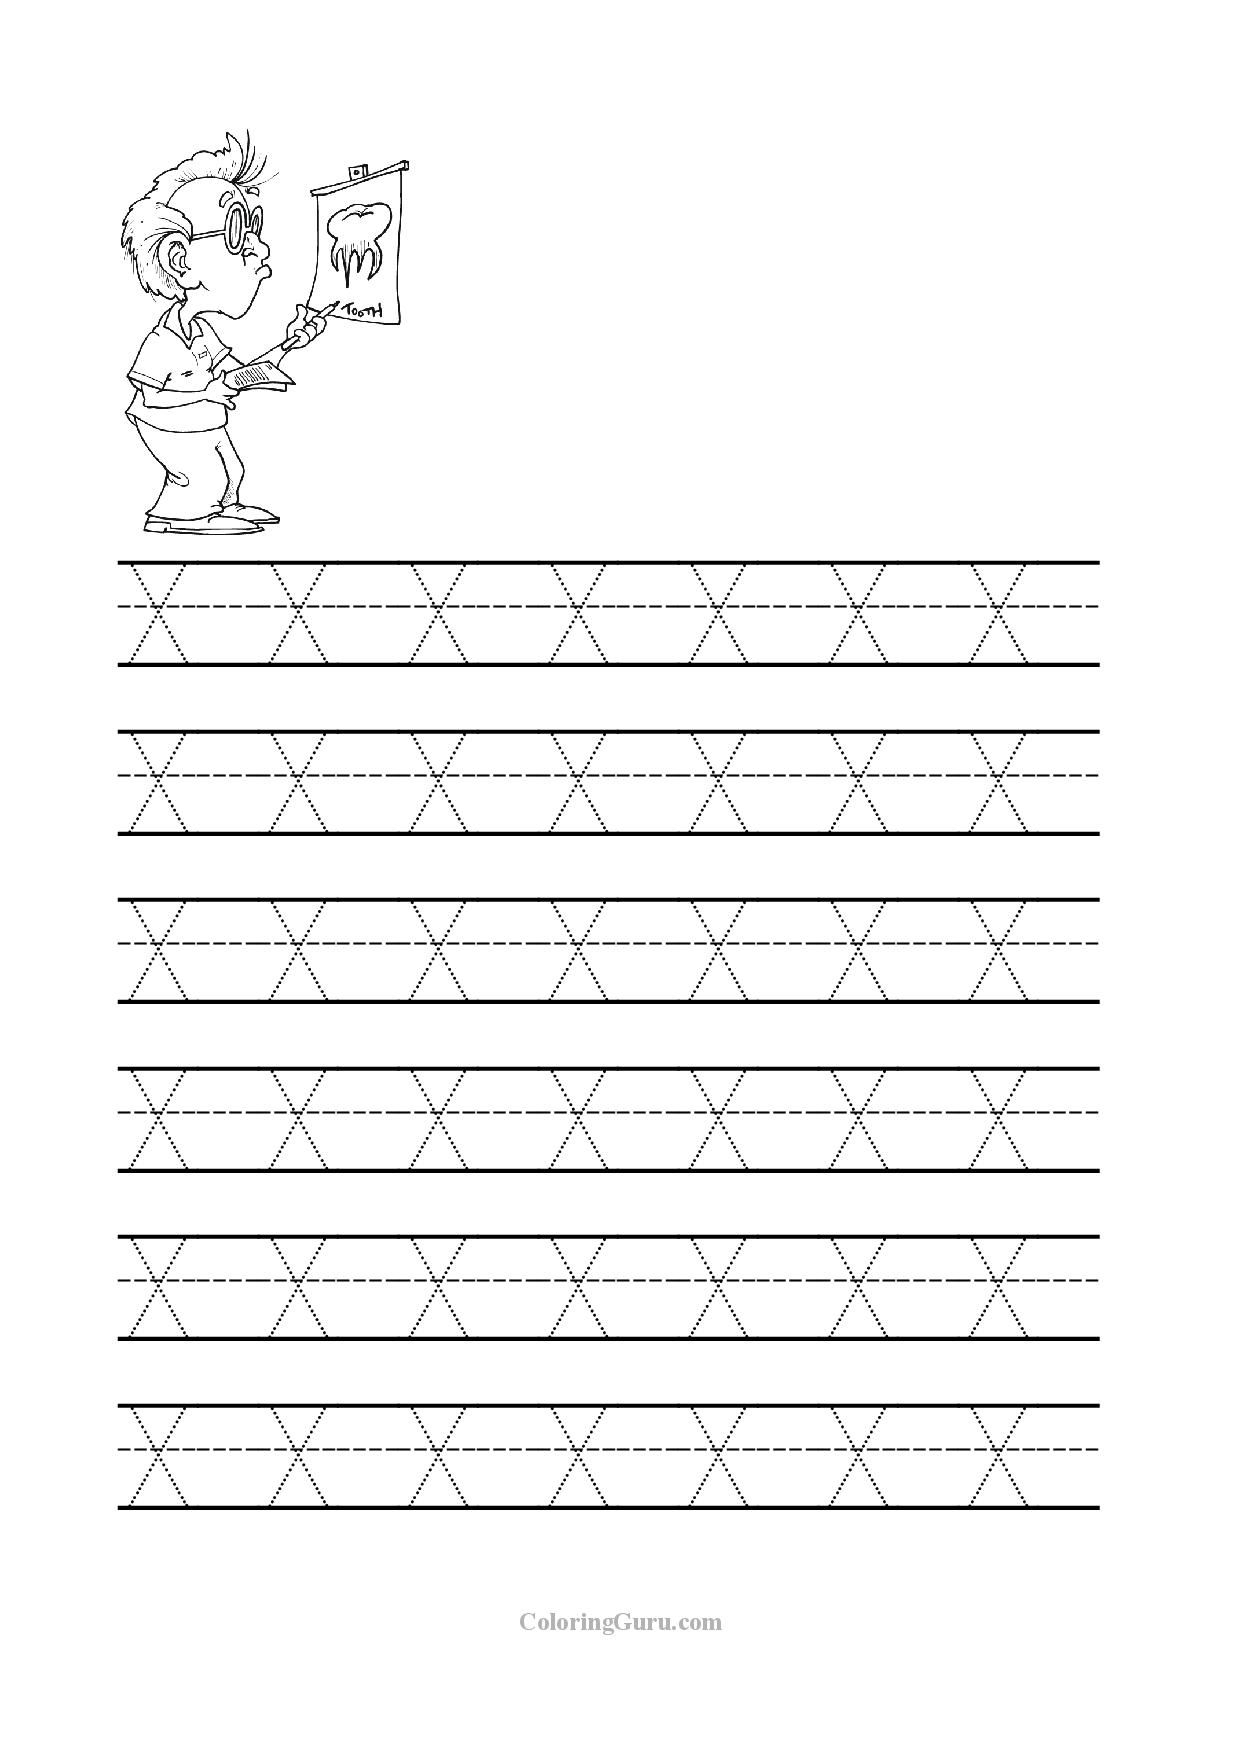 Free Printable Tracing Letter X Worksheets For Preschool intended for Letter X Worksheets For Prek